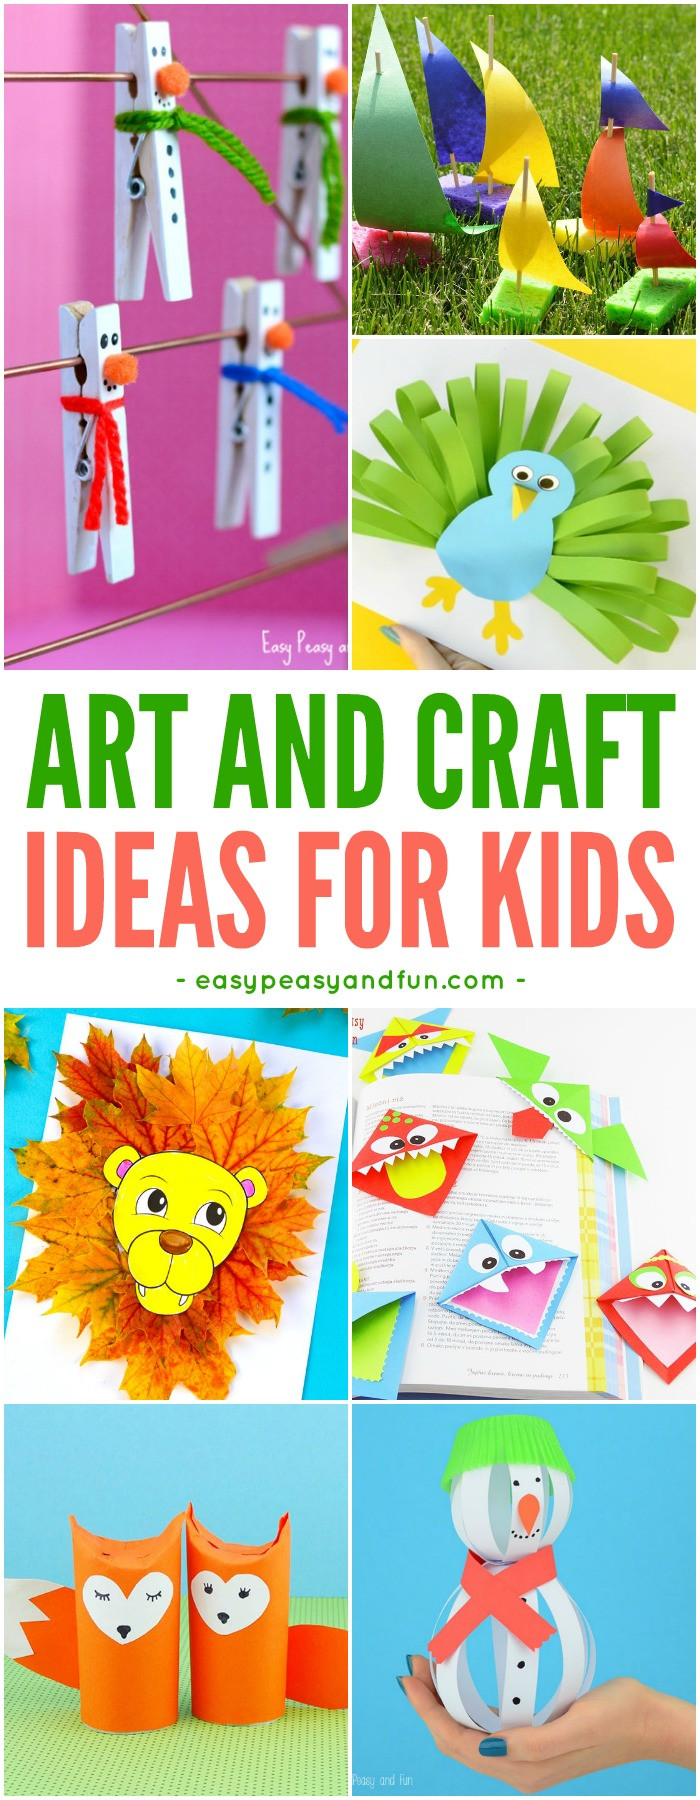 Toddlers Art And Craft Ideas
 Crafts For Kids Tons of Art and Craft Ideas for Kids to